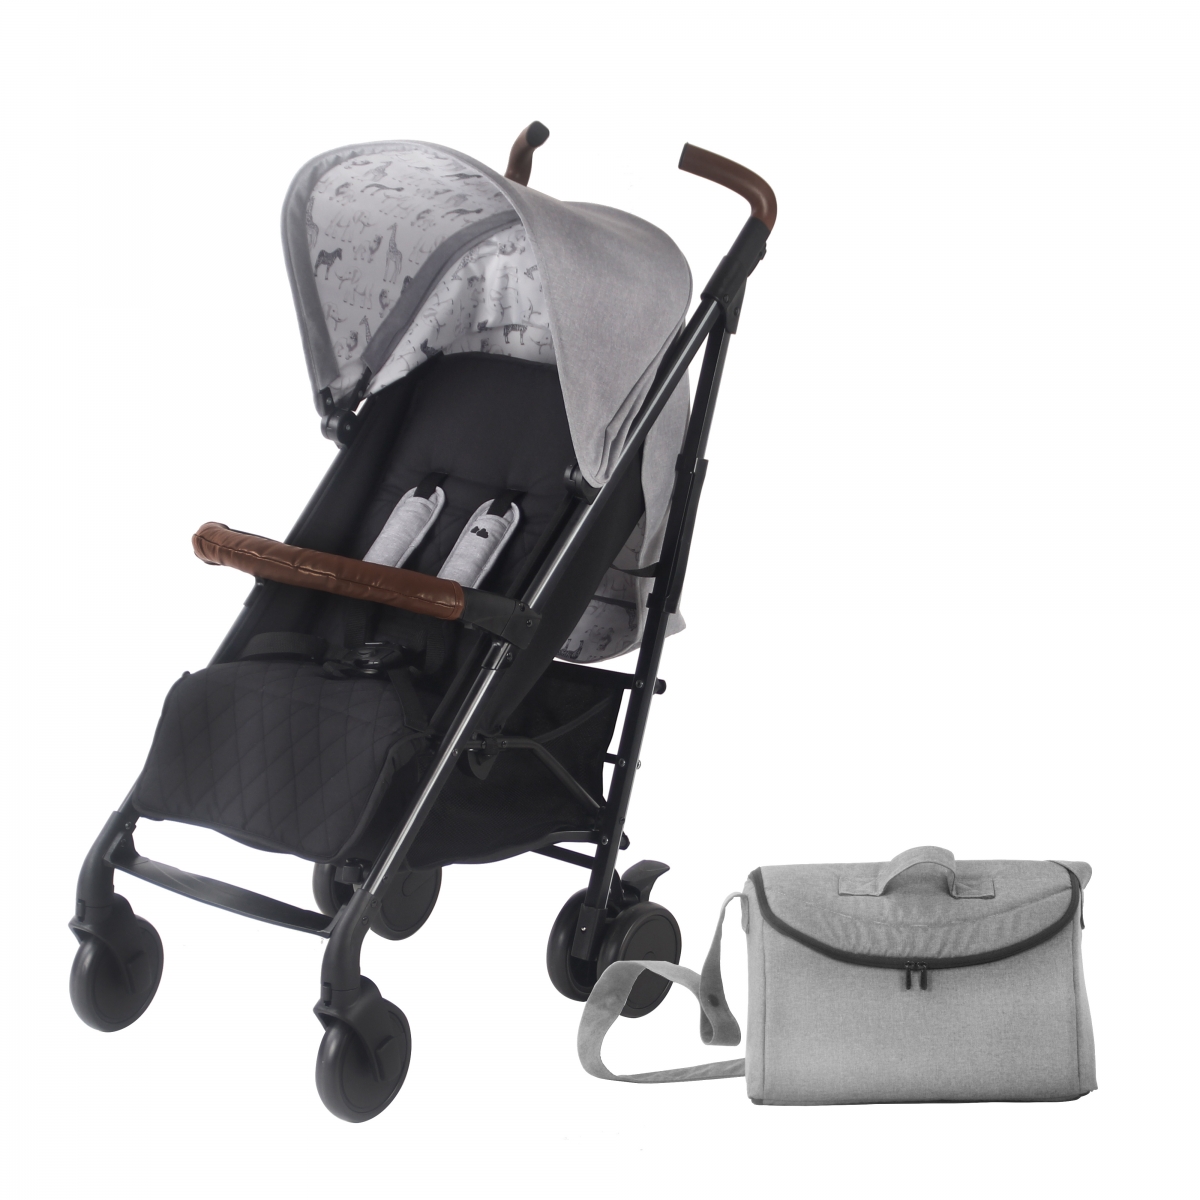 https://www.kiddies-kingdom.com/202519-thickbox_default/my-babiie-mb52-dreamiie-by-samantha-faiers-stroller-safari-with-seat-liner-changing-bag-and-leatherette-mb52sfsf.jpg